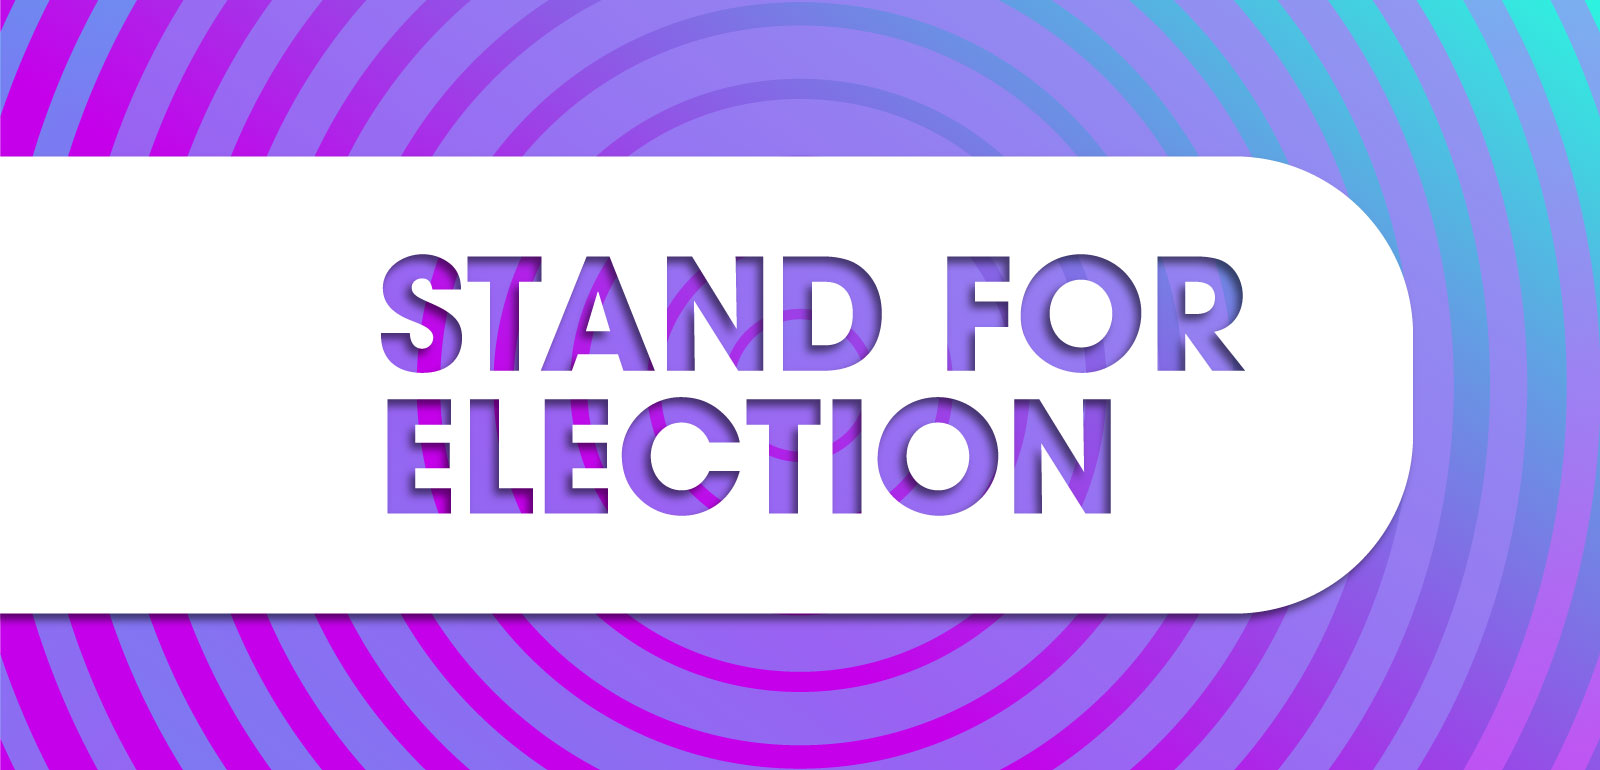 Stand for Election